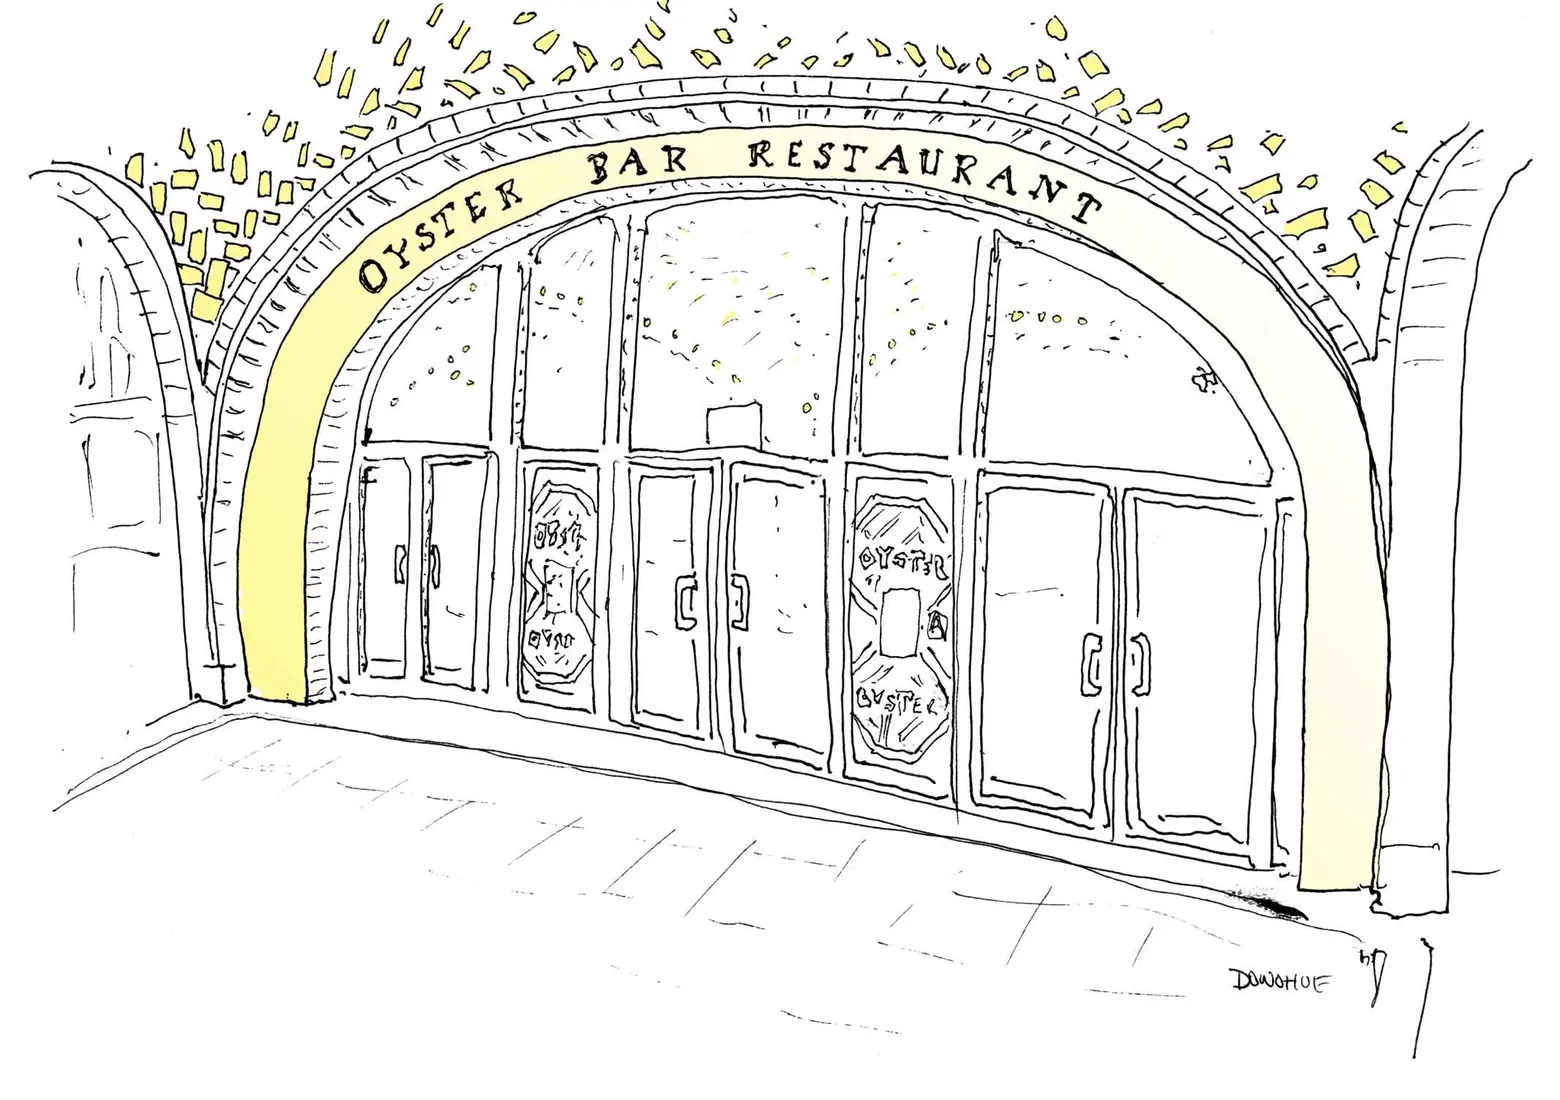 Grand Central Oyster Bar, All the Restaurants in New York, John Donohue, NYC restaurant drawings